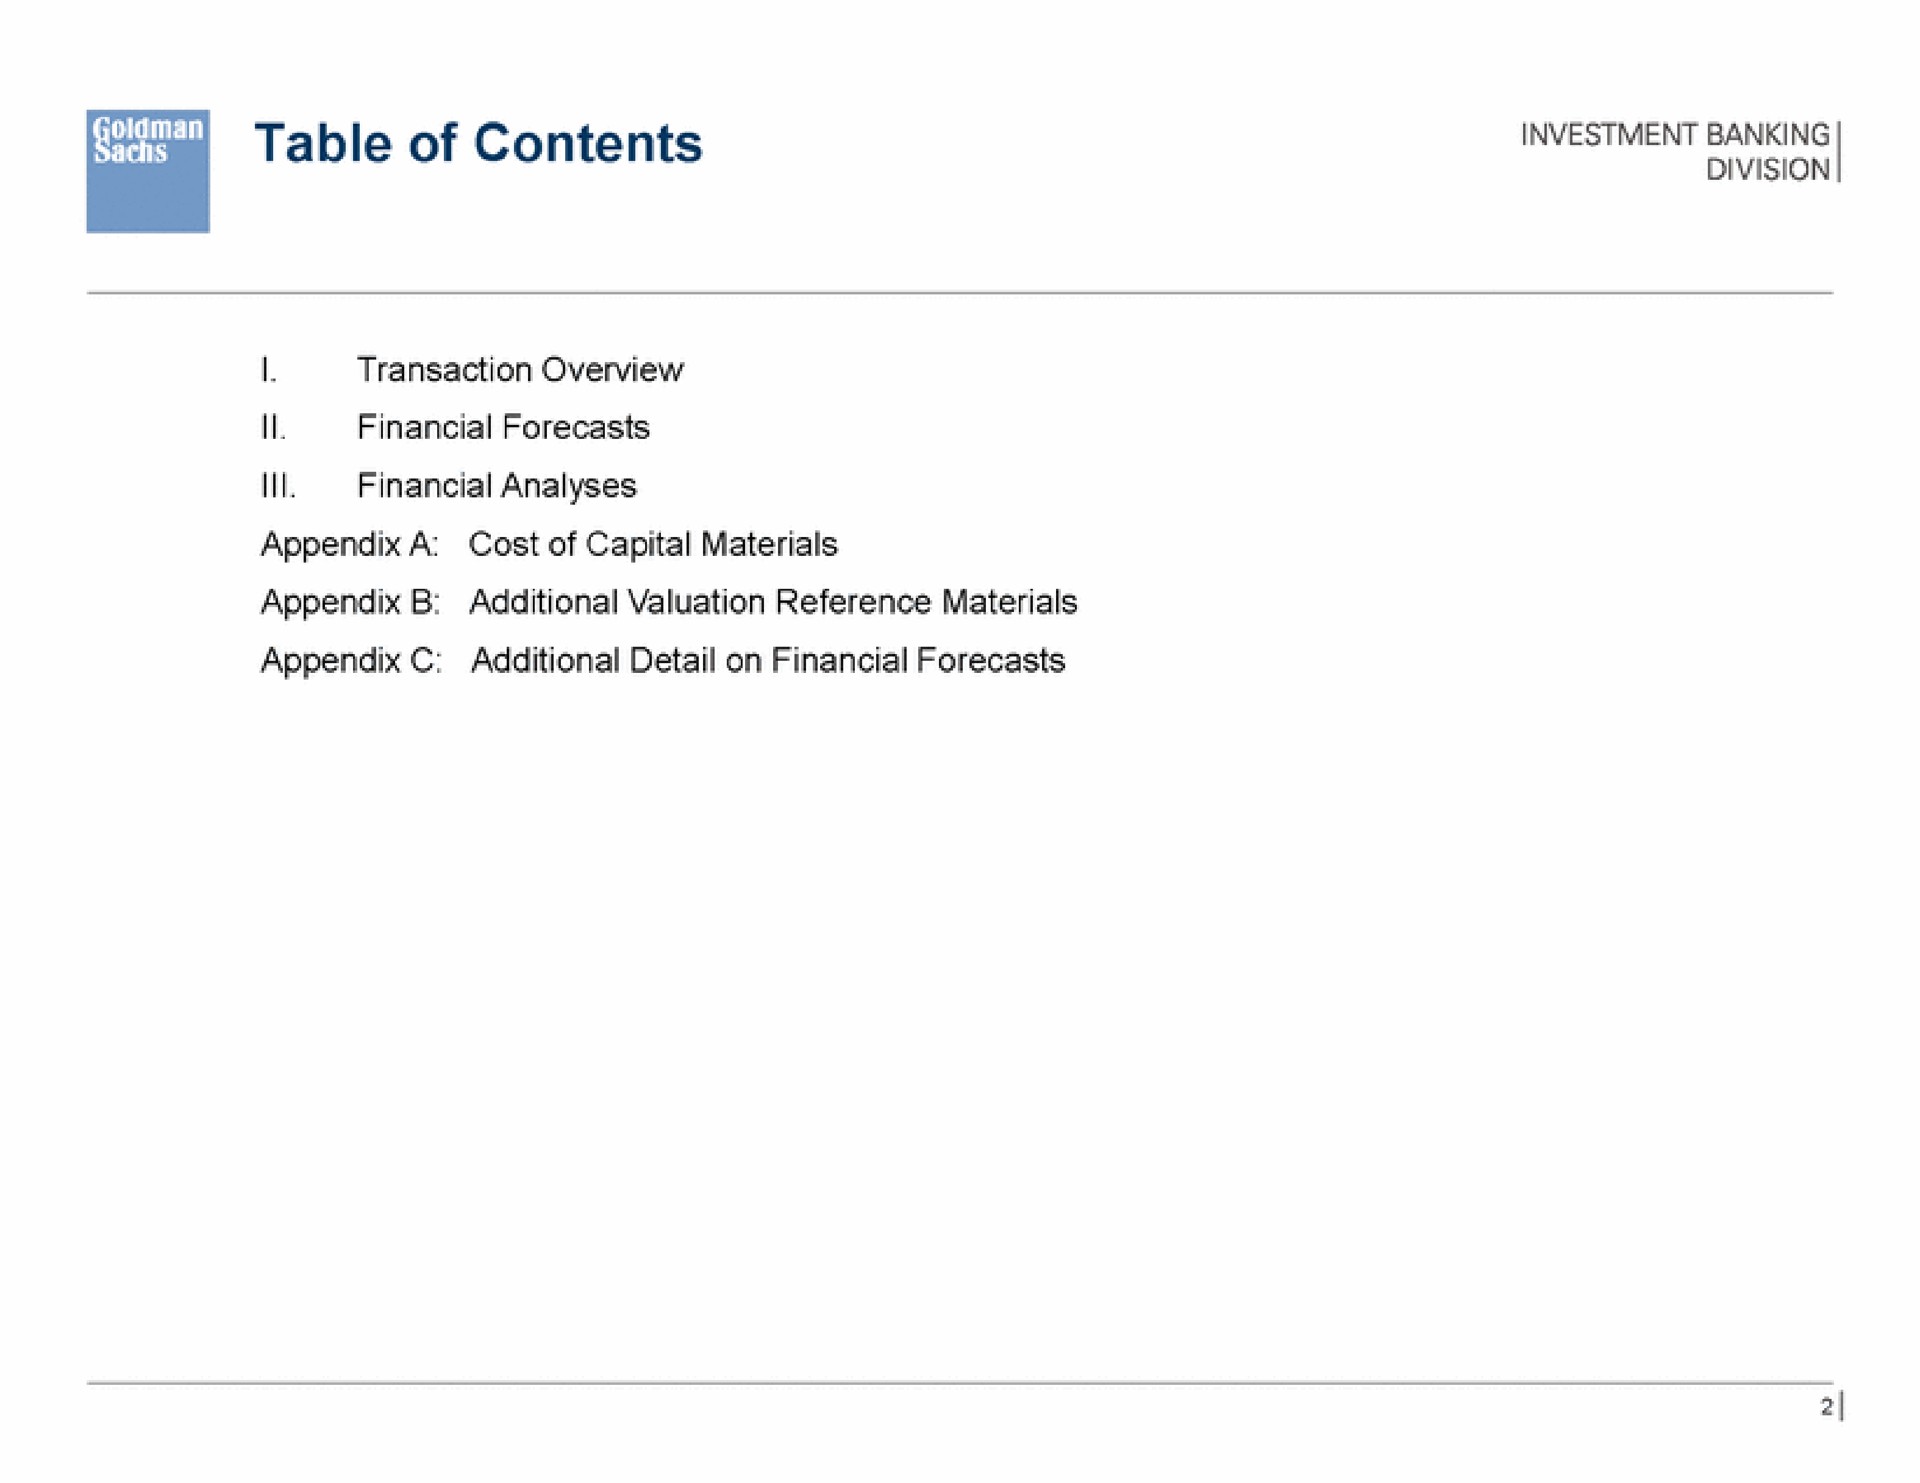 table of contents | Goldman Sachs